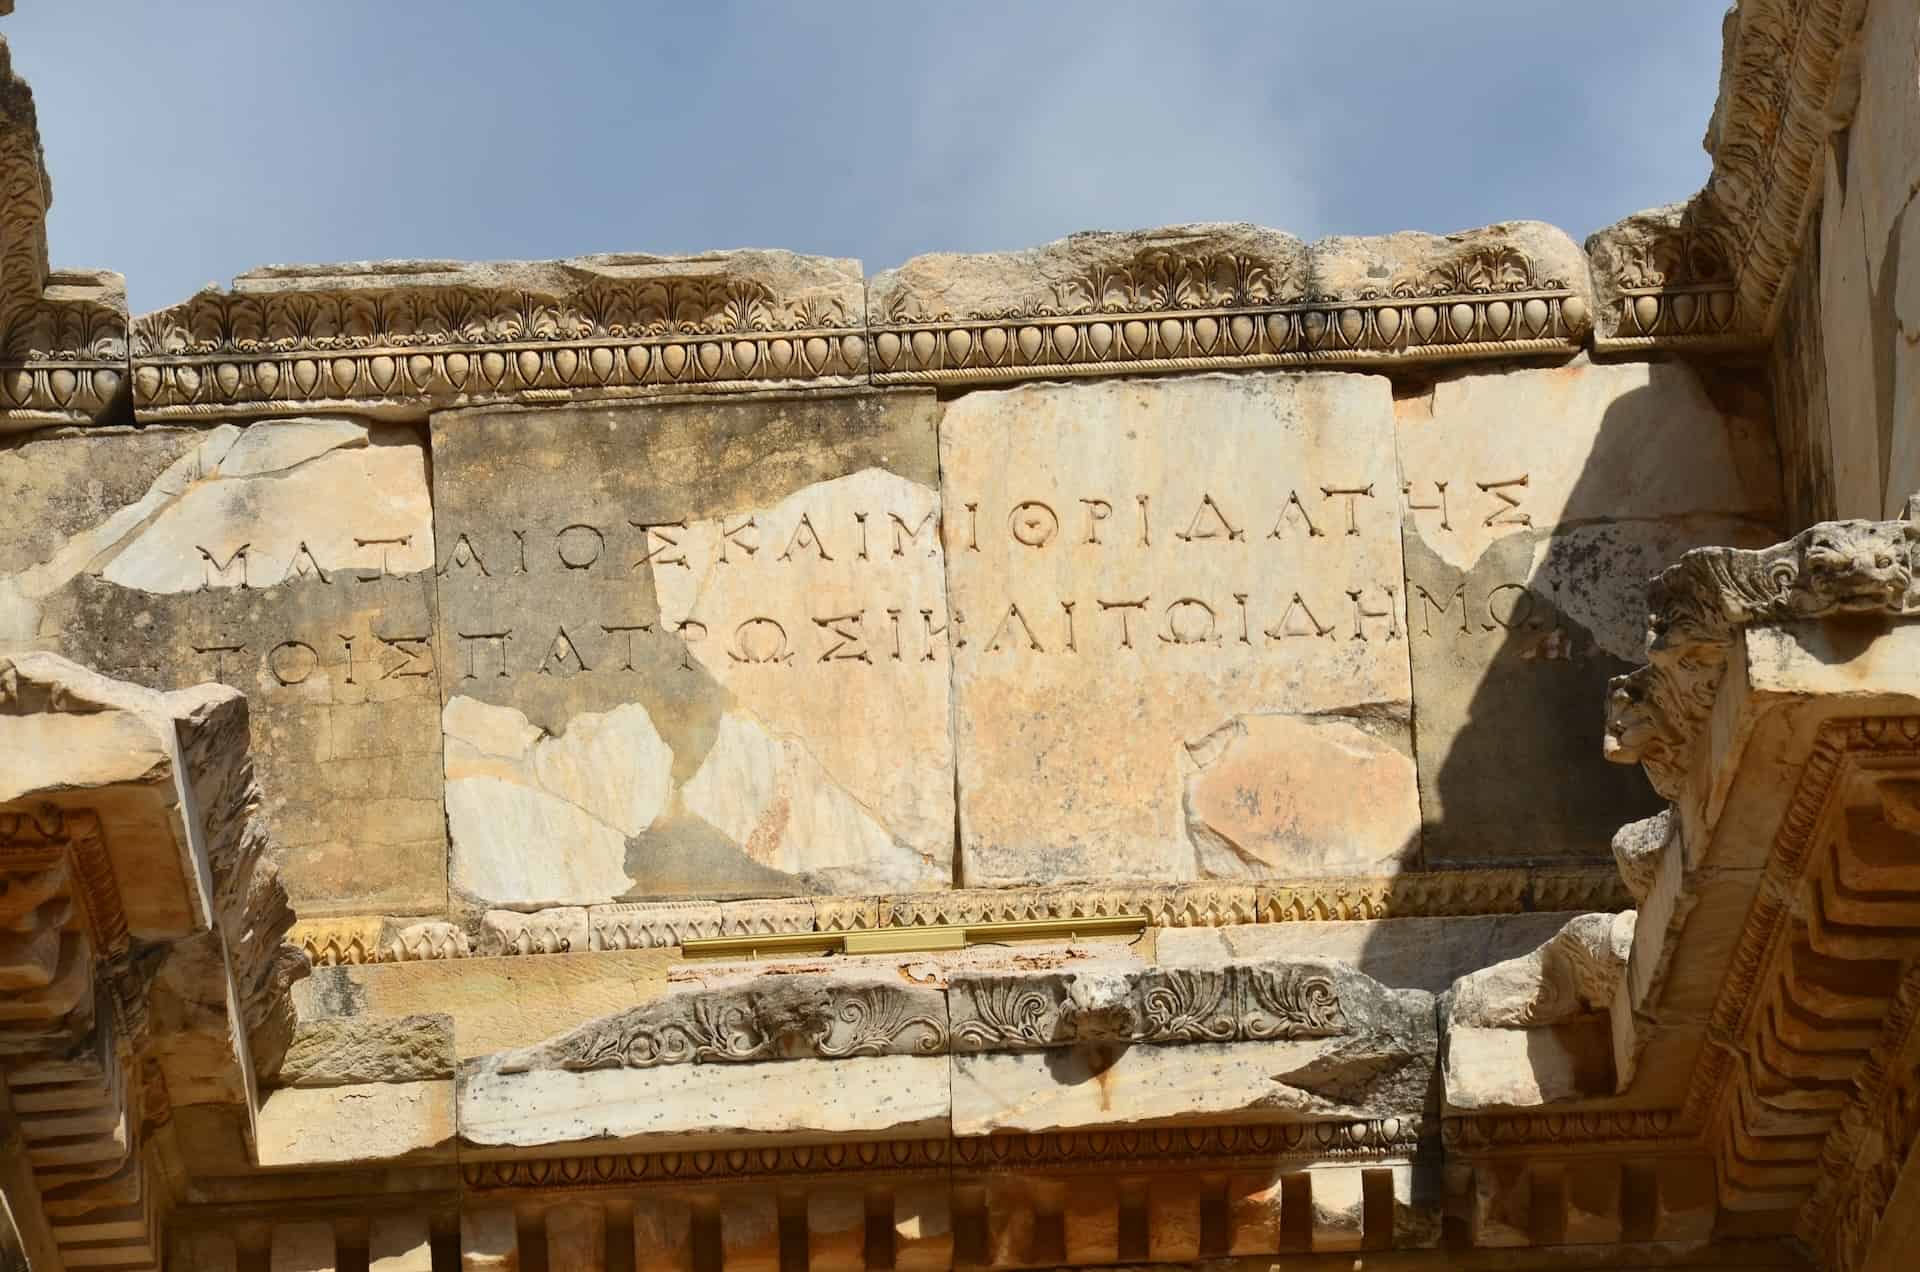 Greek inscription over the central arch on the Gate of Mazeus and Mithridates